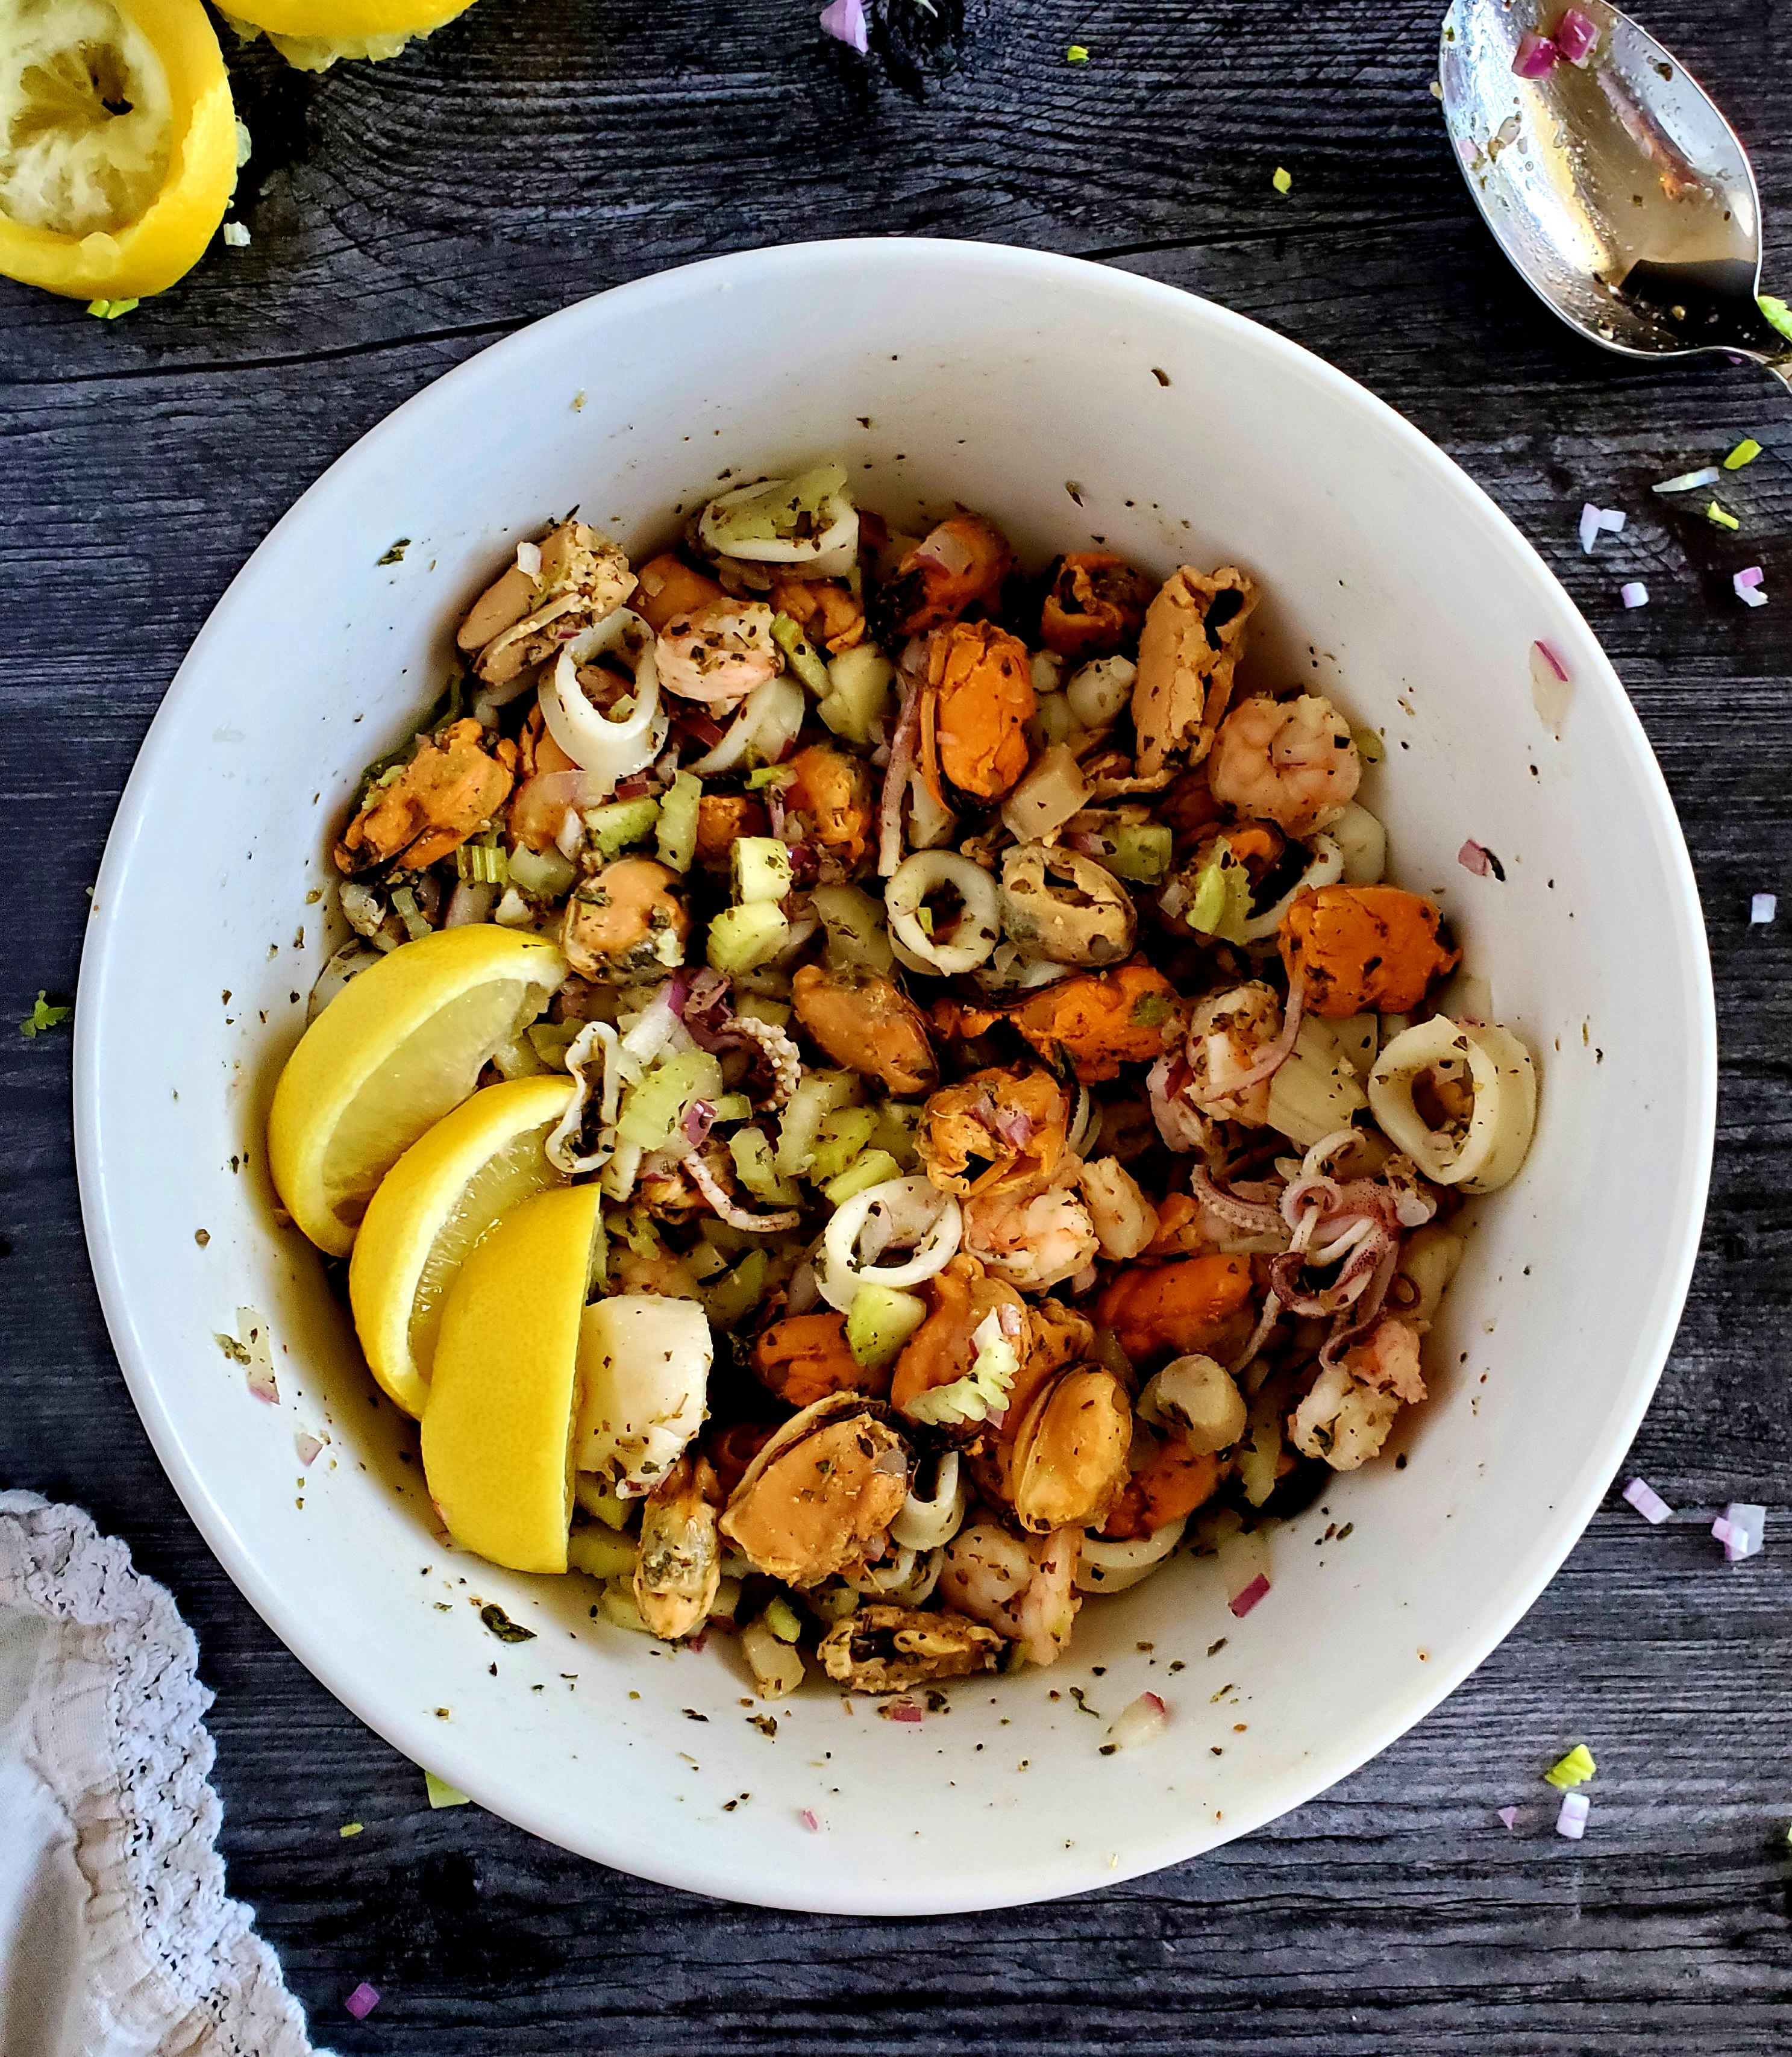 Chilled Seafood Salad (Recipe Inspired by WHERE THE CRAWDADS SING)